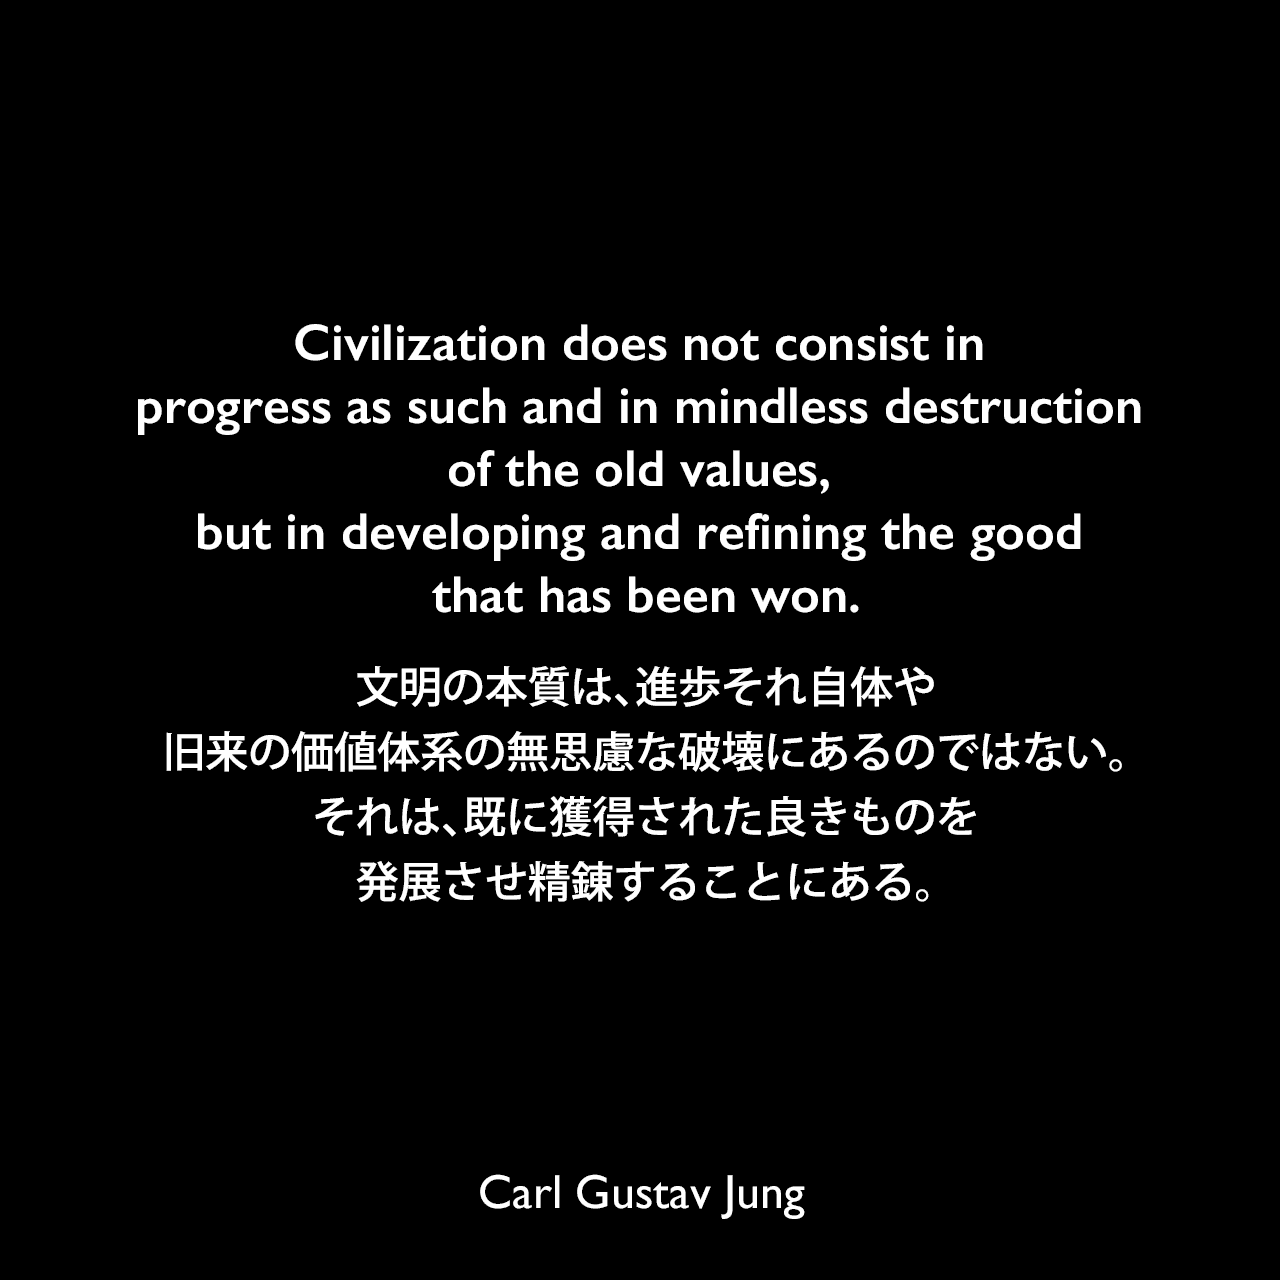 Civilization does not consist in progress as such and in mindless destruction of the old values, but in developing and refining the good that has been won.文明の本質は、進歩それ自体や、旧来の価値体系の無思慮な破壊にあるのではない。それは、既に獲得された良きものを発展させ精錬することにある。Carl Gustav Jung